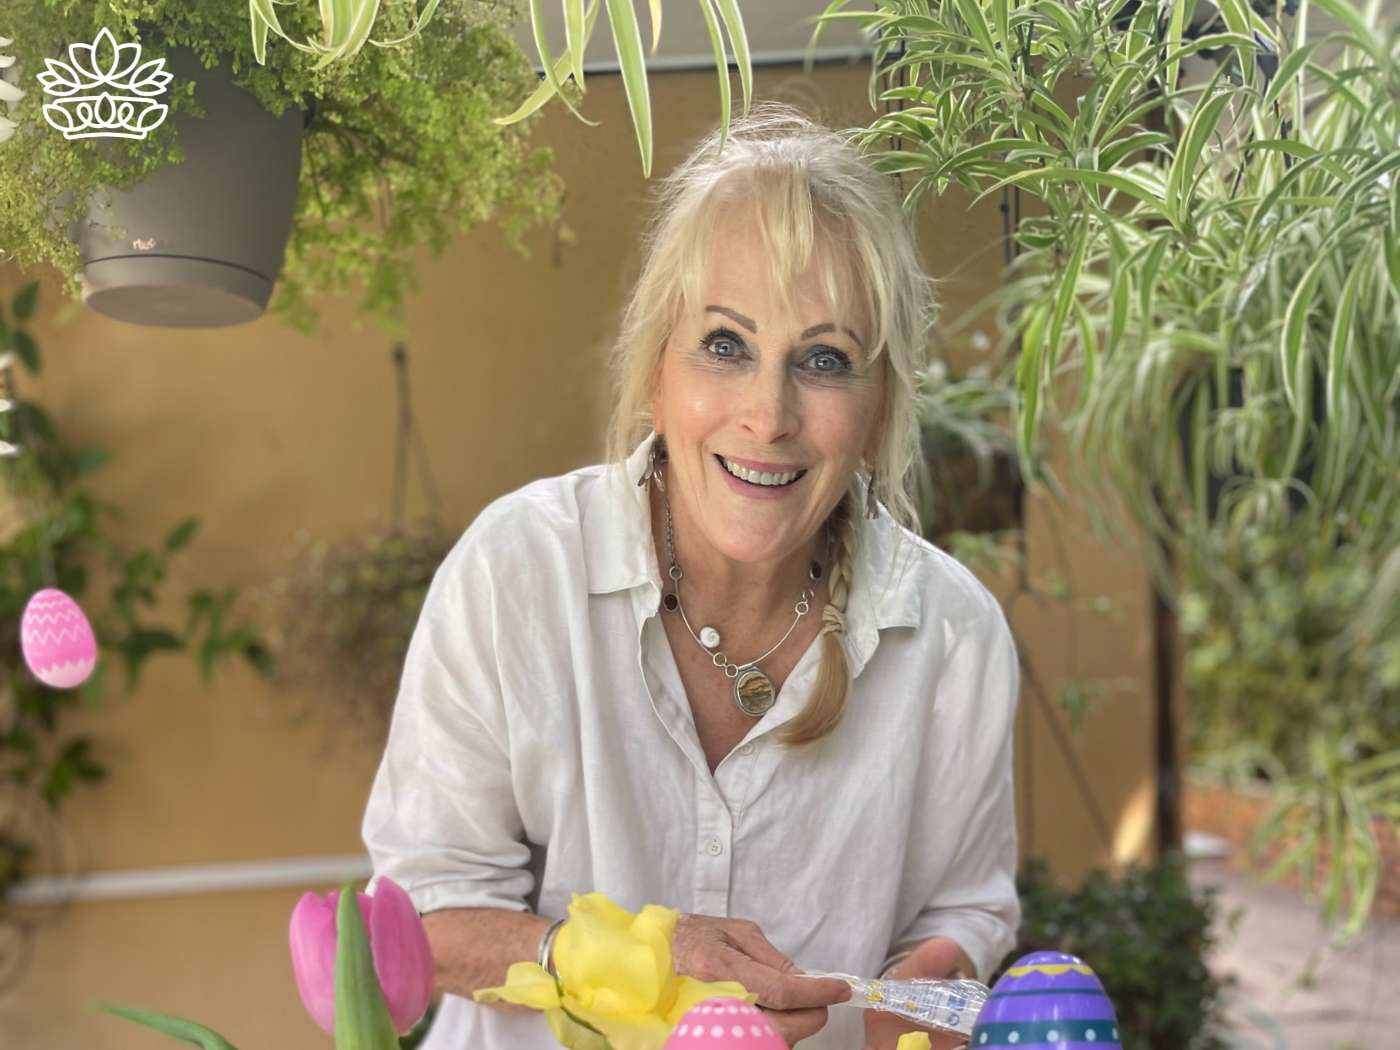 Smiling woman creating a traditional Easter basket with hot glue, surrounded by colorful decorations, showcasing the larger Easter basket variety from the Easter Collection by Fabulous Flowers and Gifts.